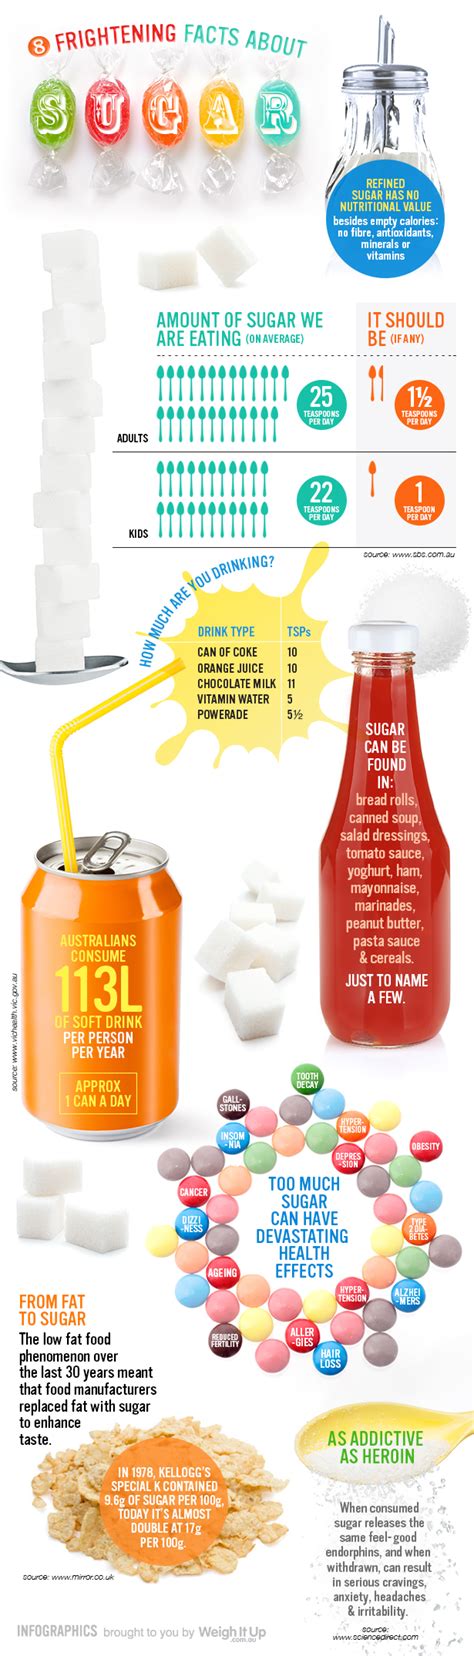 8 Facts About Sugar That Will Frighten You Infographic Naturalon